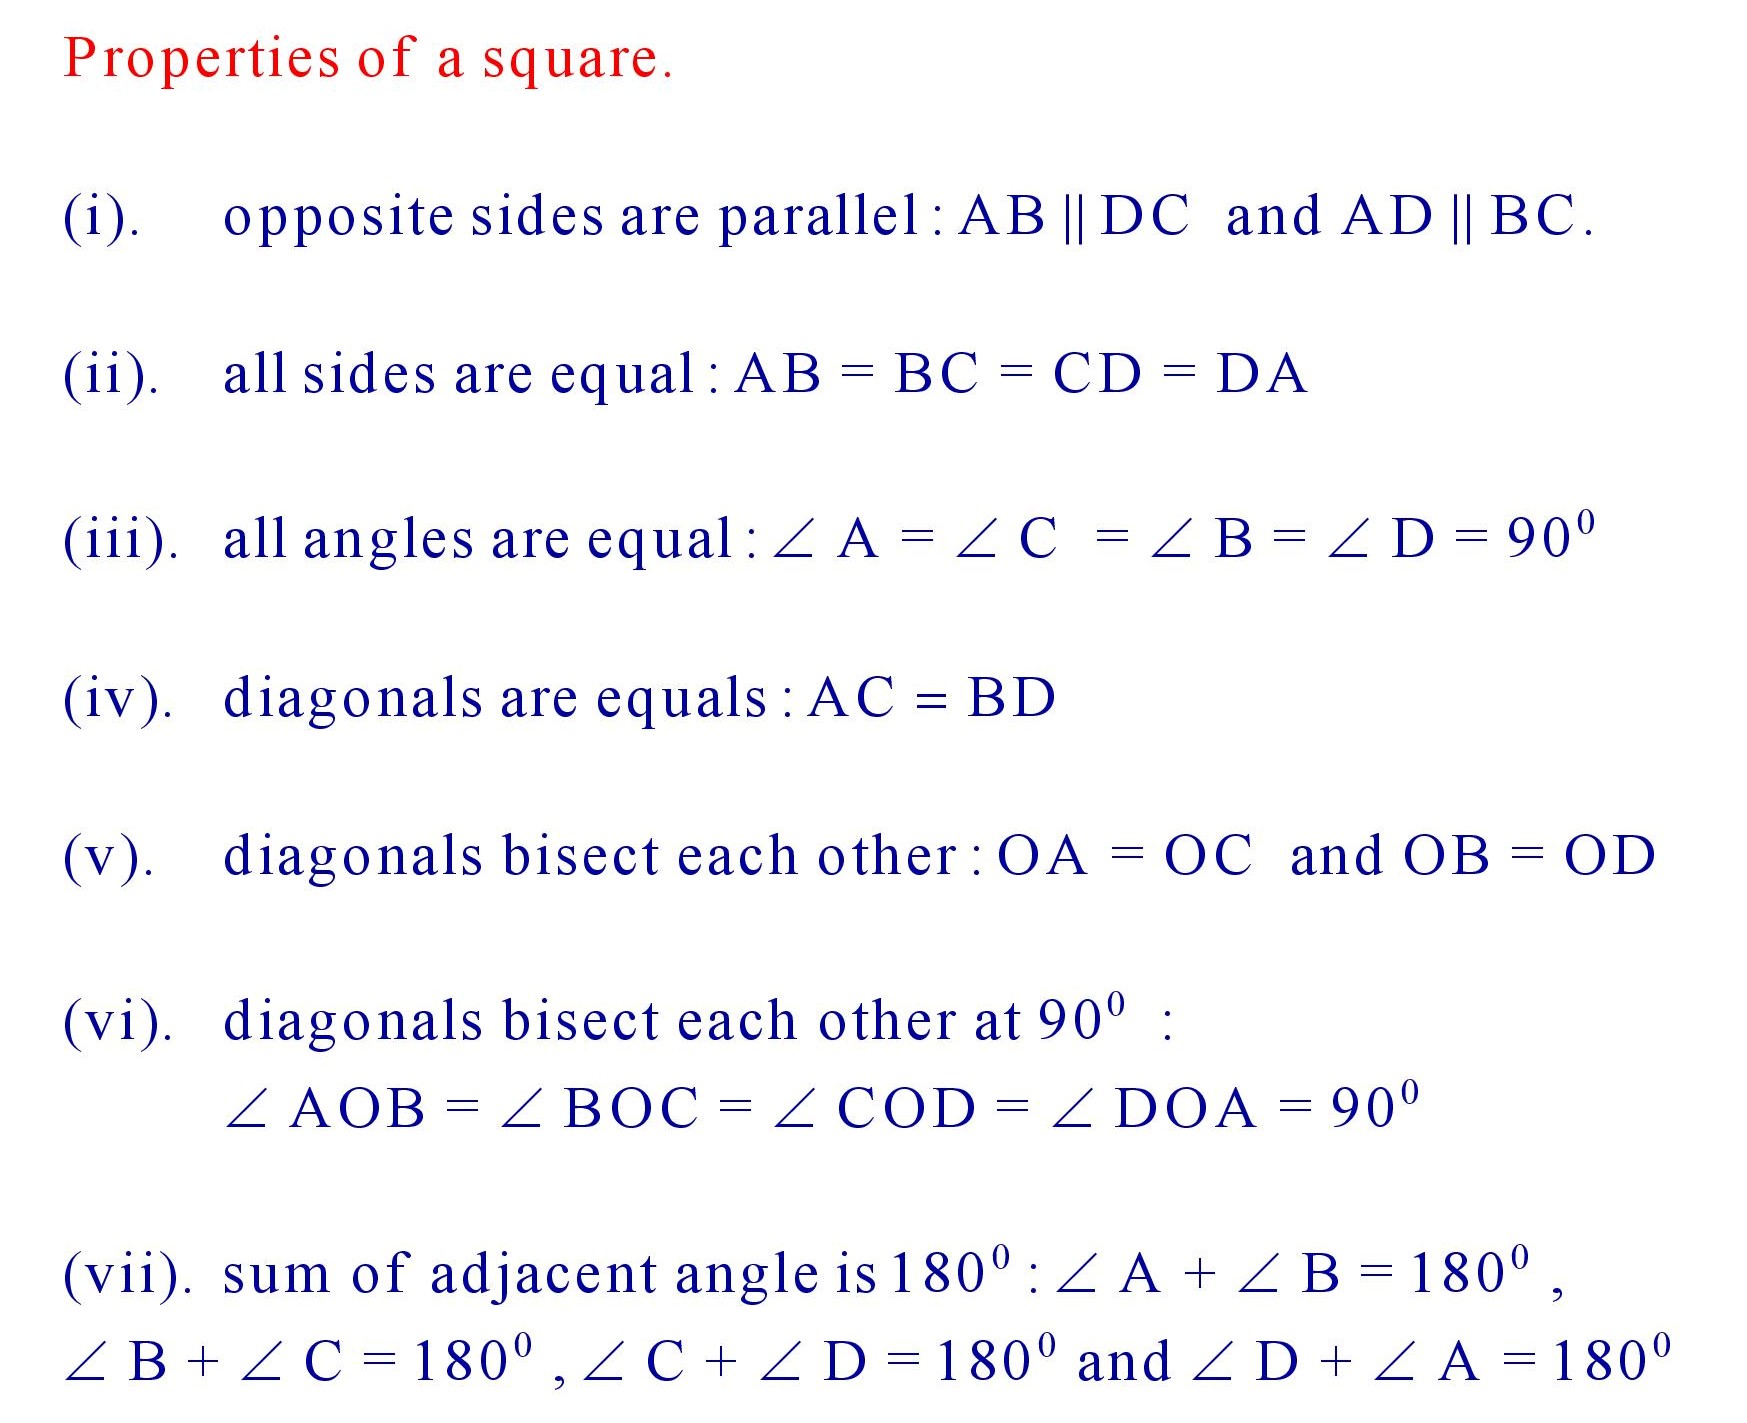 Properties of a Square